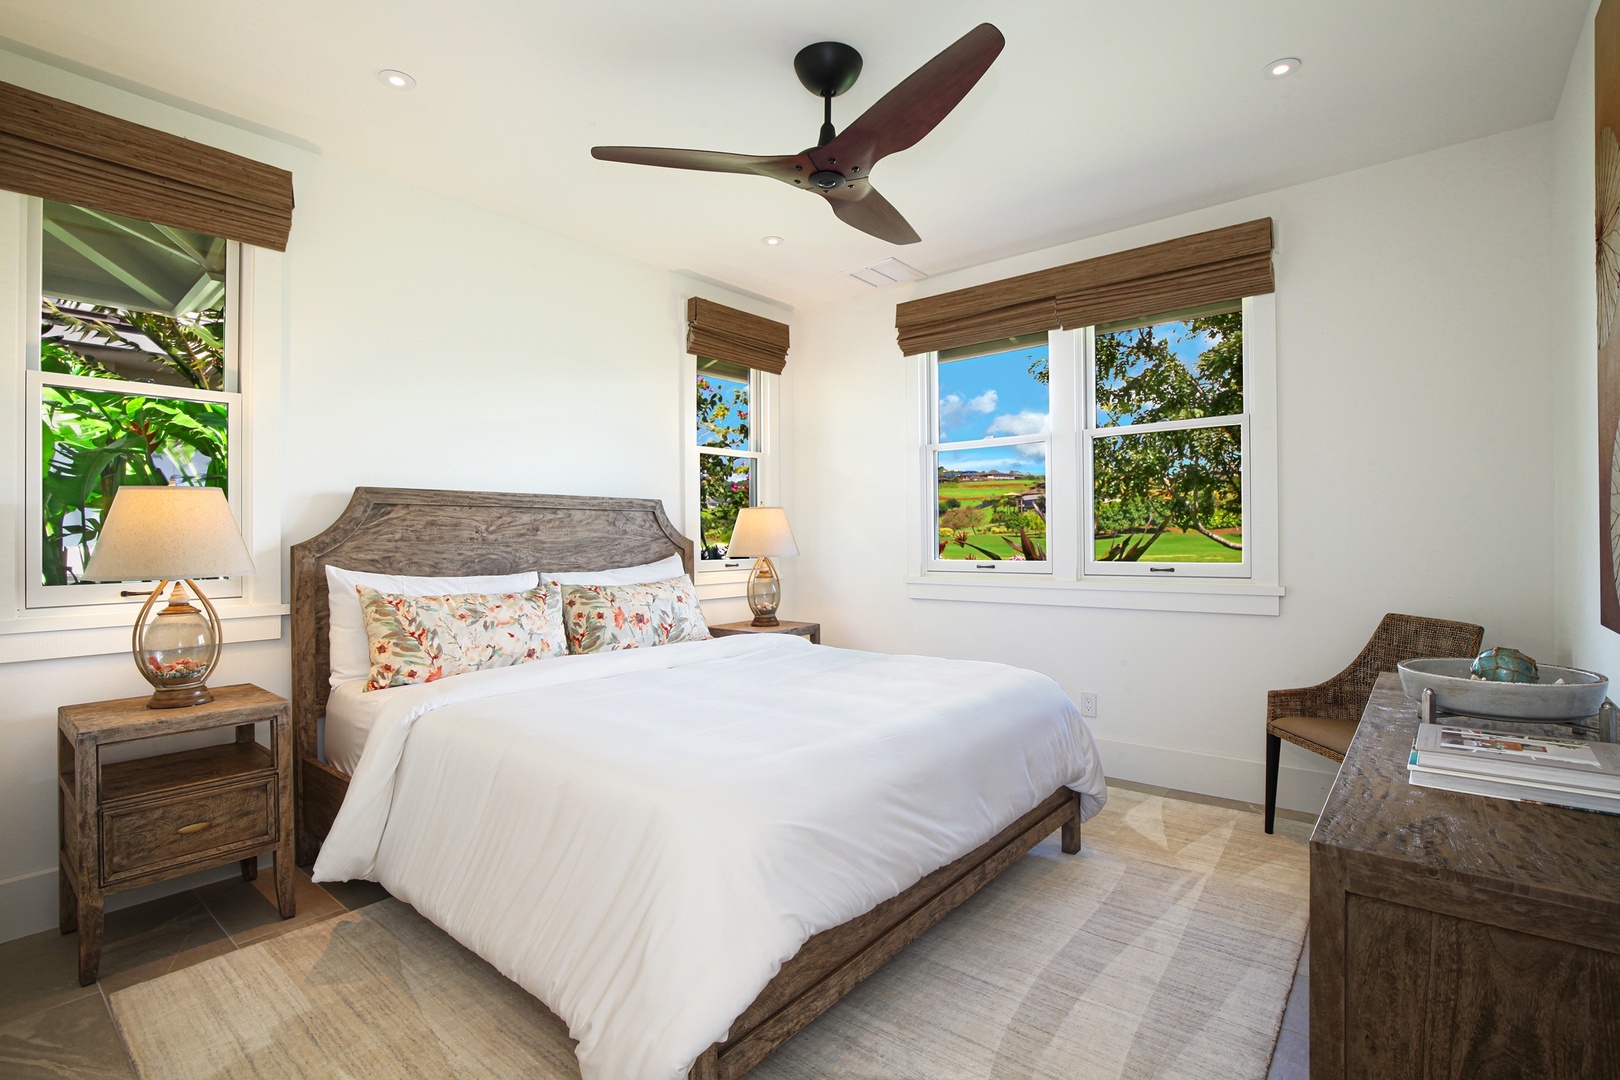 Koloa Vacation Rentals, Hale Mala Ulu - Guest bedroom 2 with king bed and garden views